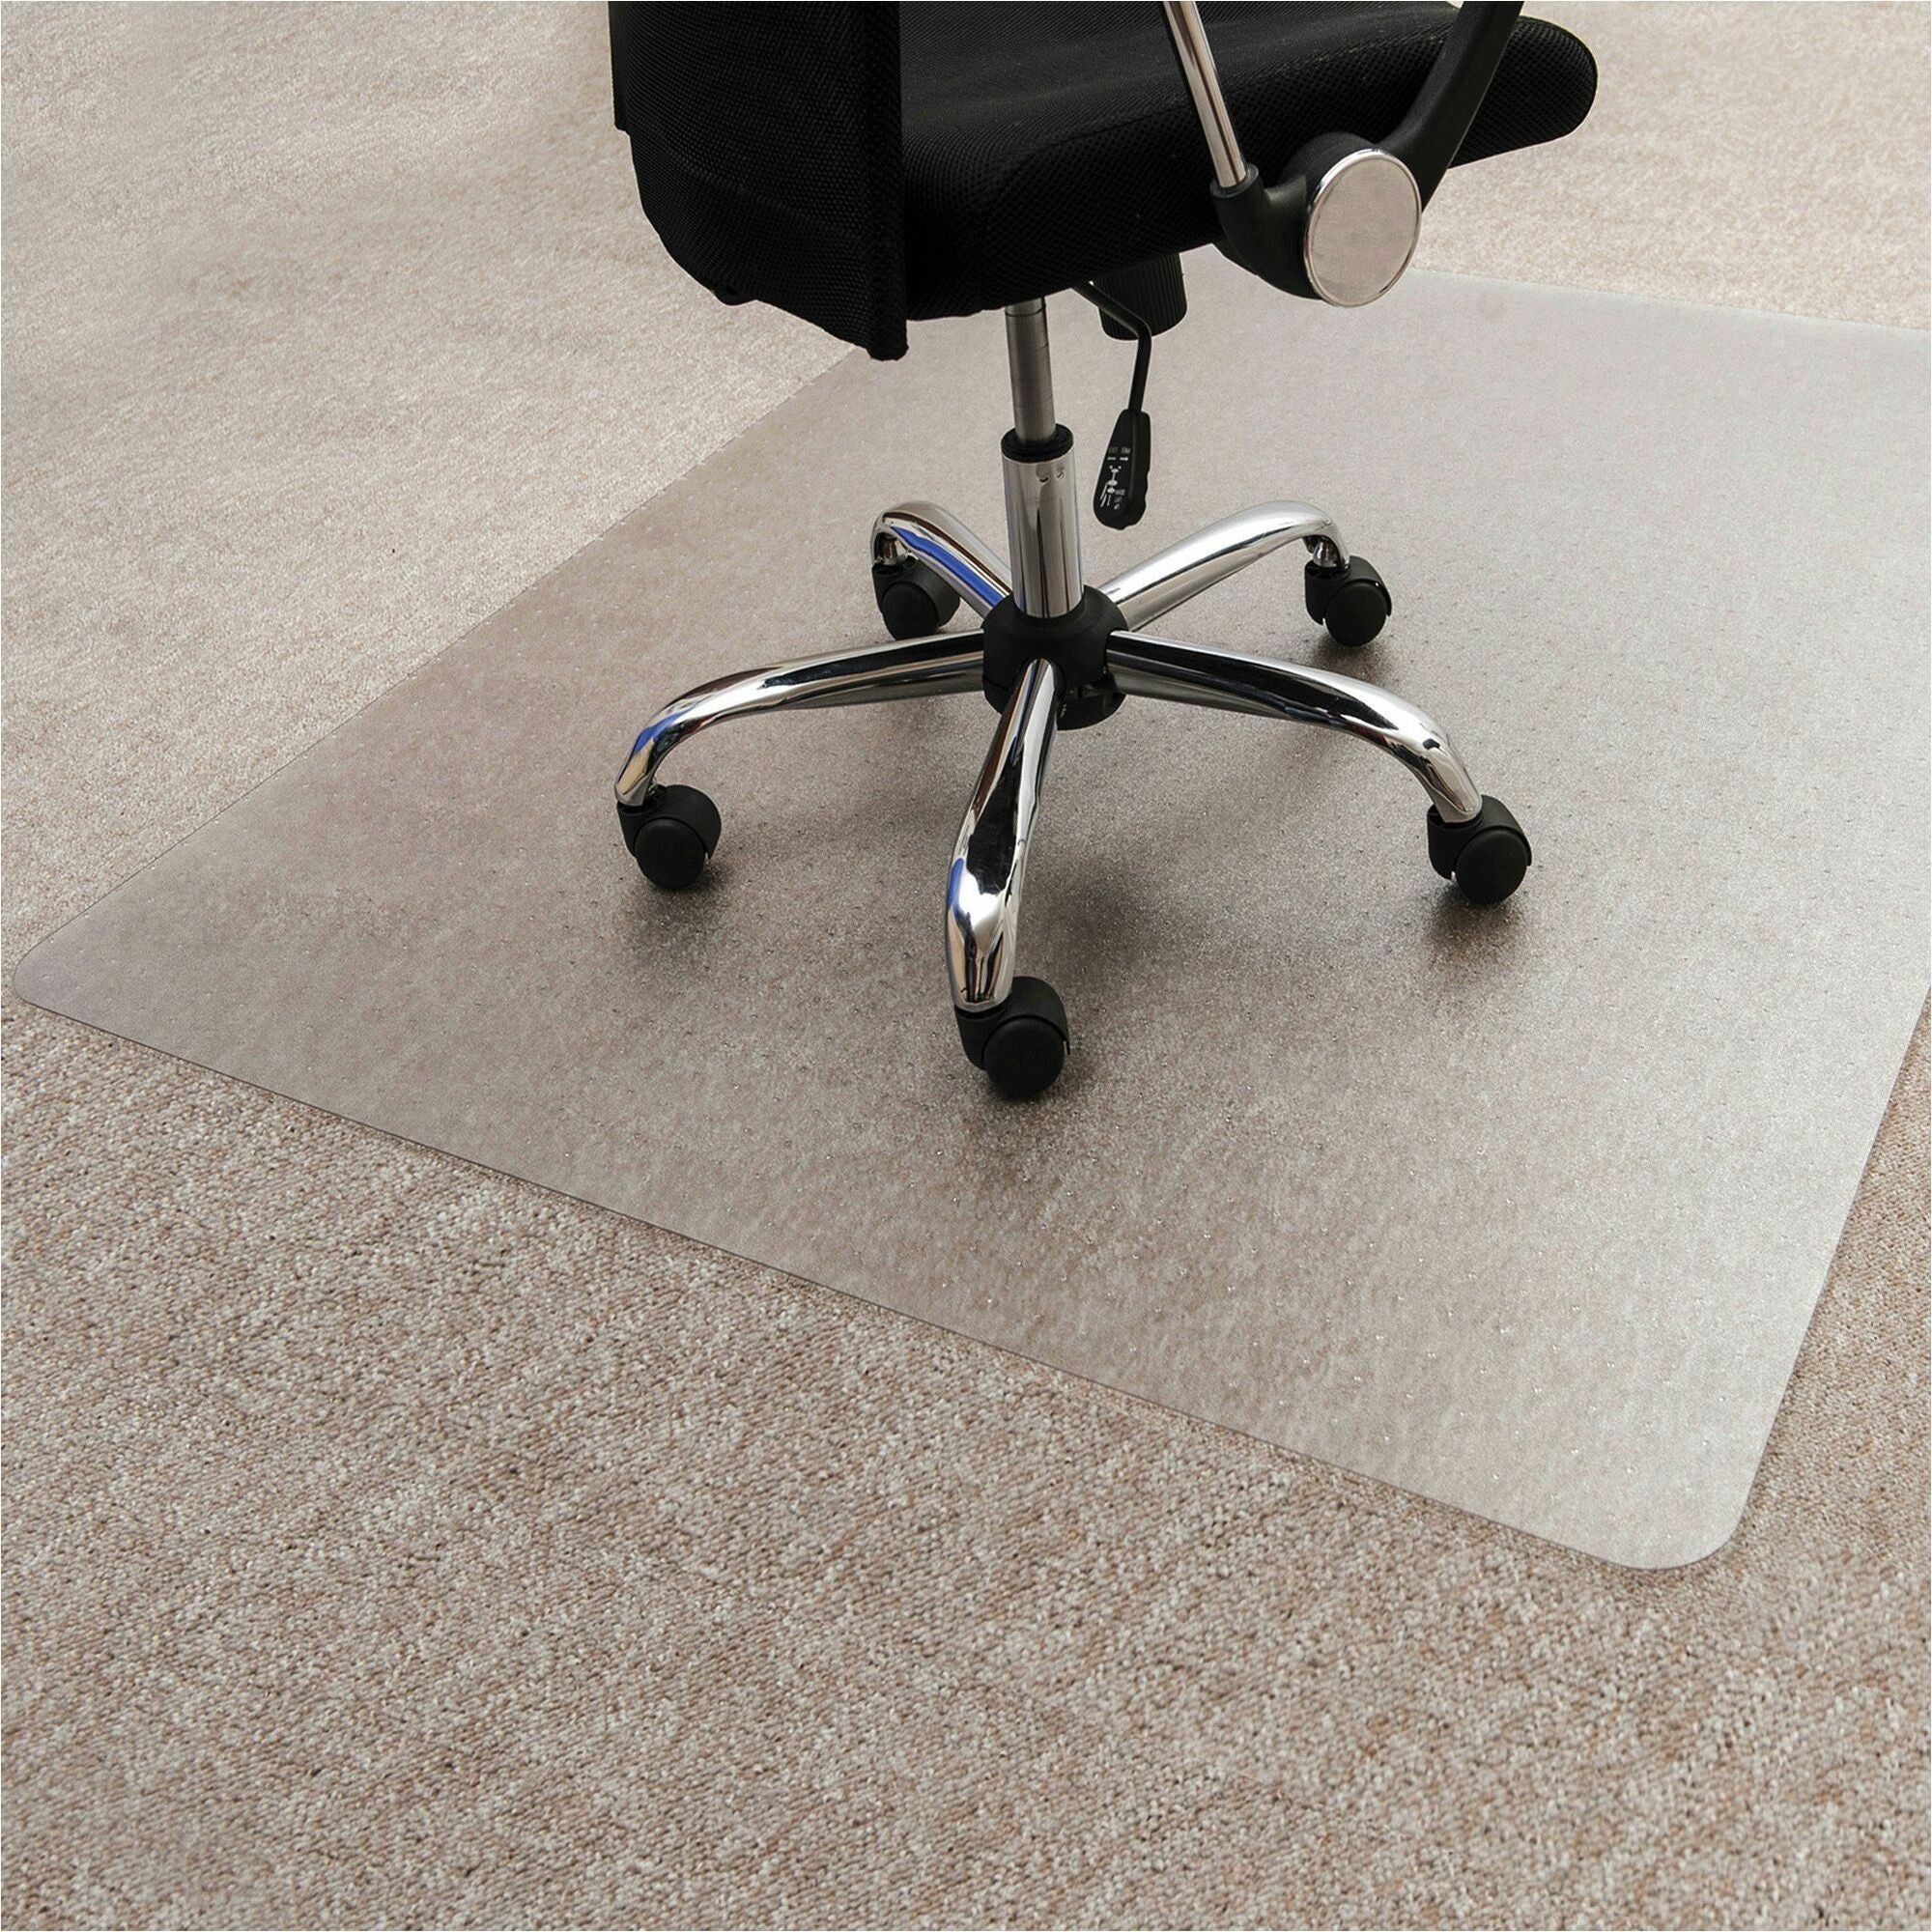 ecotex-enhanced-polymer-rectangular-chair-mat-for-carpets-up-to-3-8-48-x-60-home-office-carpet-indoor-hard-floor-60-length-x-48-width-x-0087-depth-x-0087-thickness-rectangular-polymer-clear-1each-taa-compliant_flreco114860ep - 1